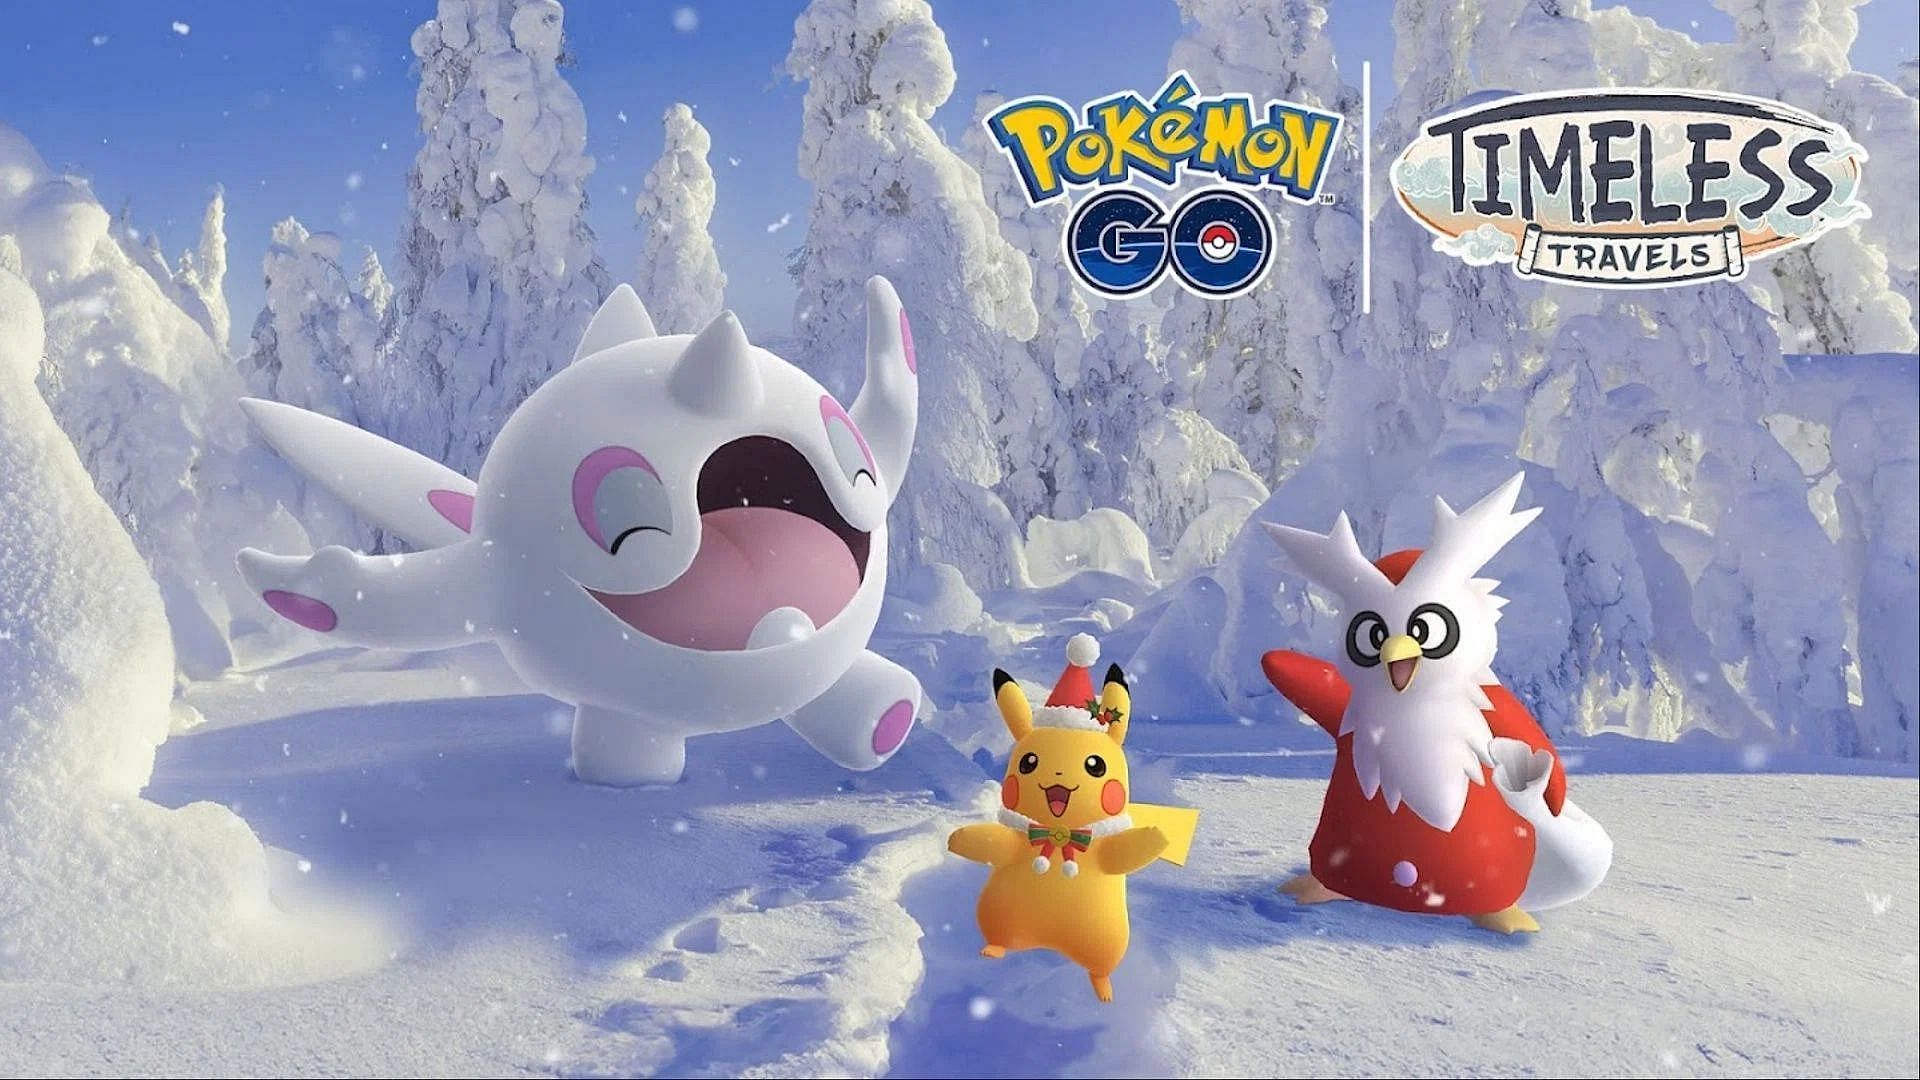 Pokemon GO Frosty Festivities Timed Research tasks and rewards